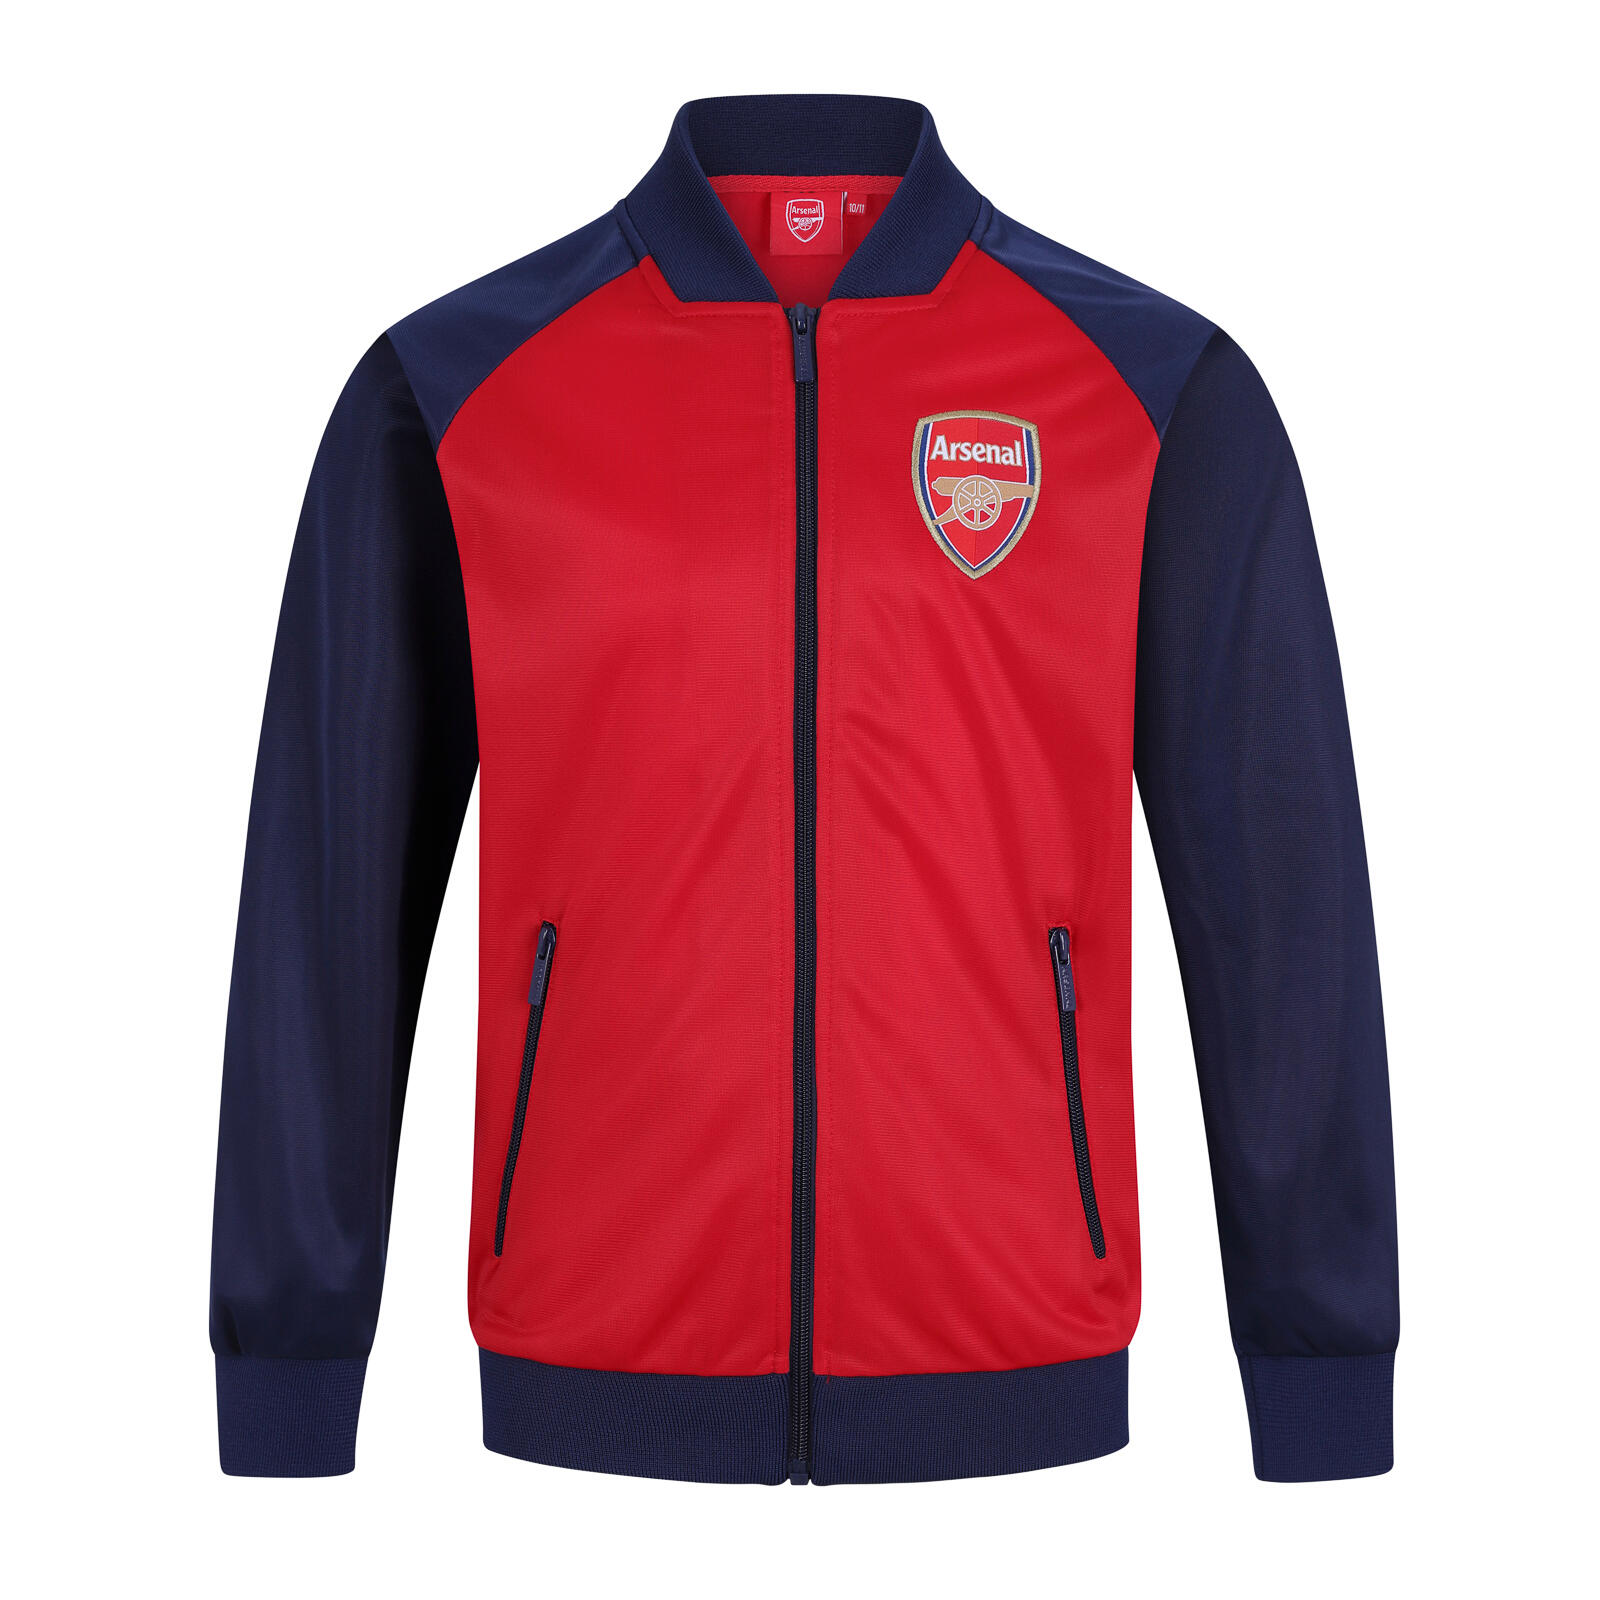 Arsenal FC Boys Jacket Track Top Retro Kids OFFICIAL Football Gift 1/4